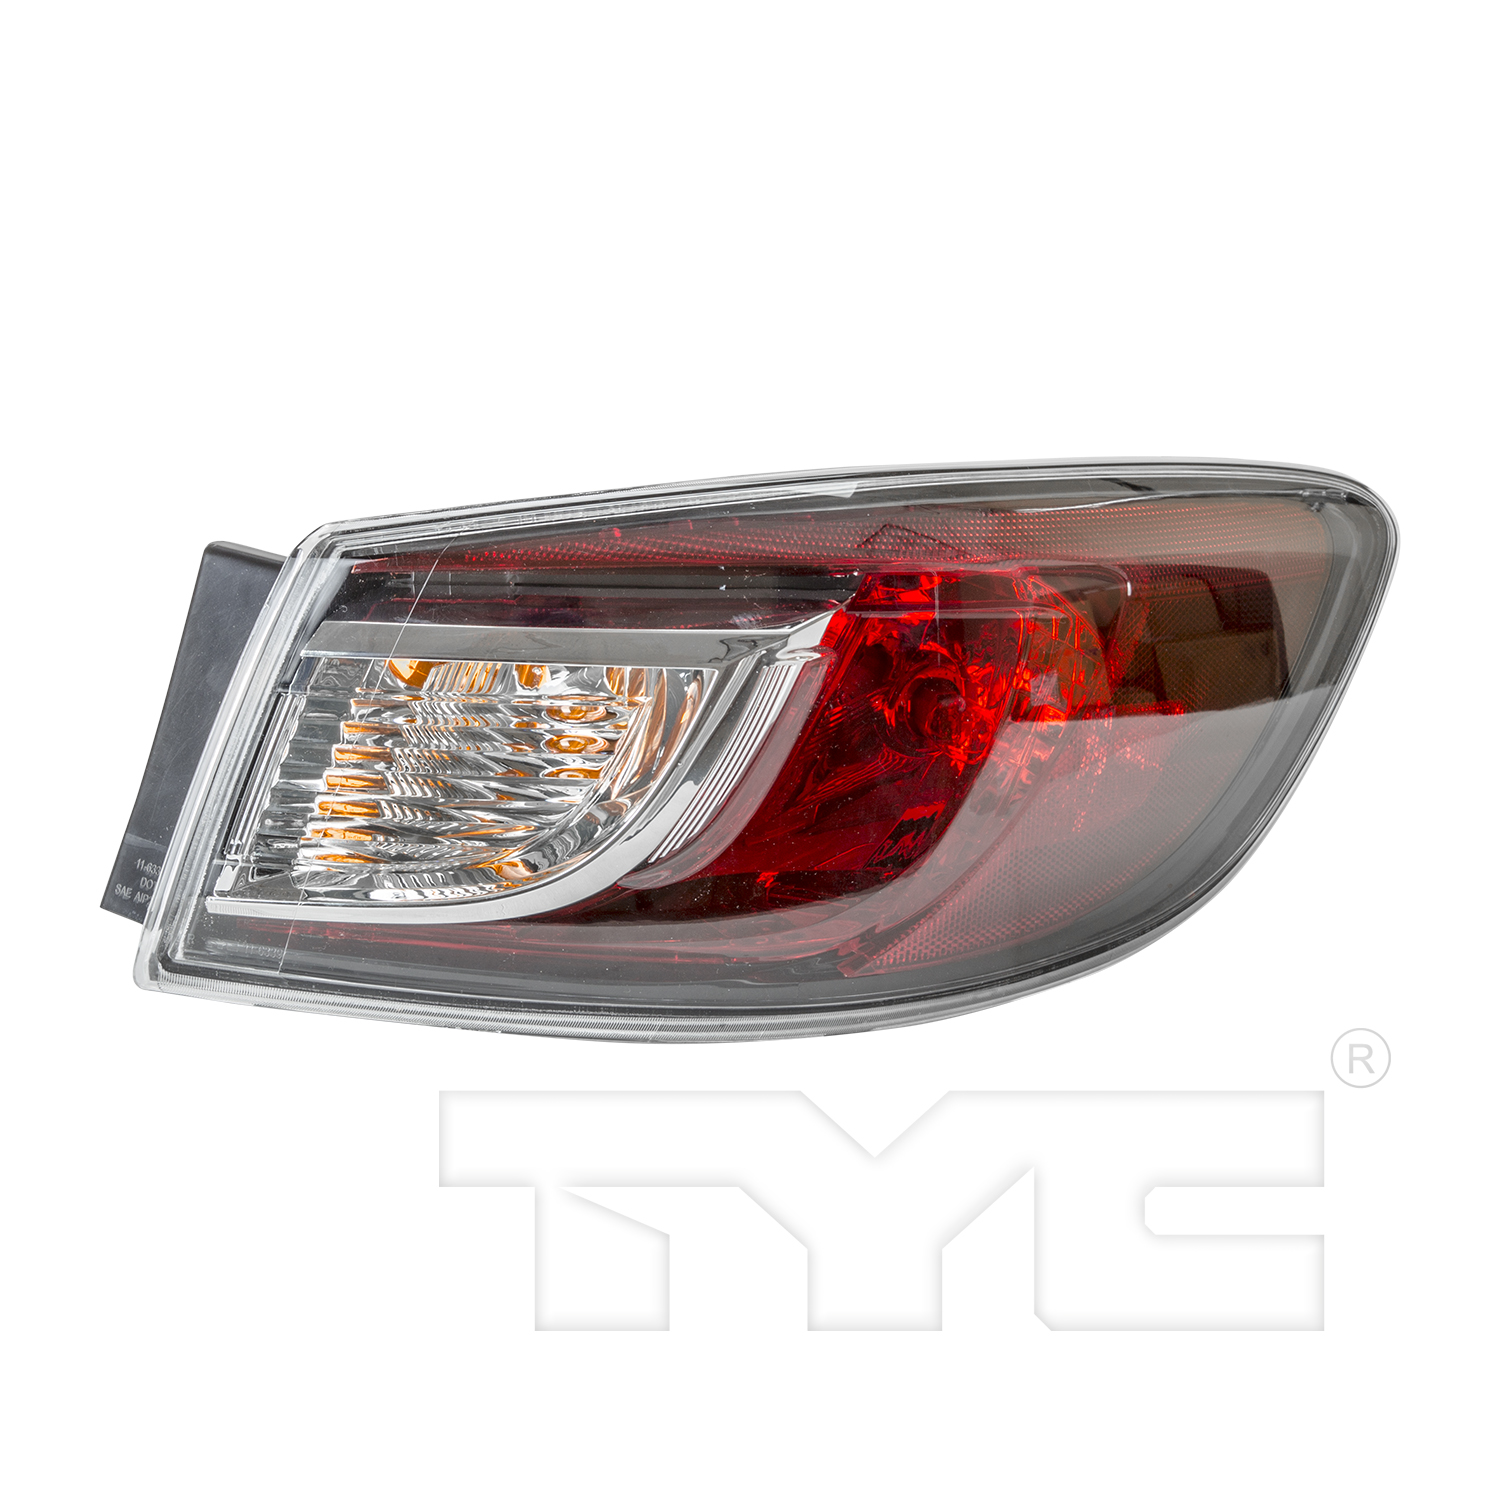 Aftermarket TAILLIGHTS for MAZDA - 3, 3,10-13,RT Taillamp assy